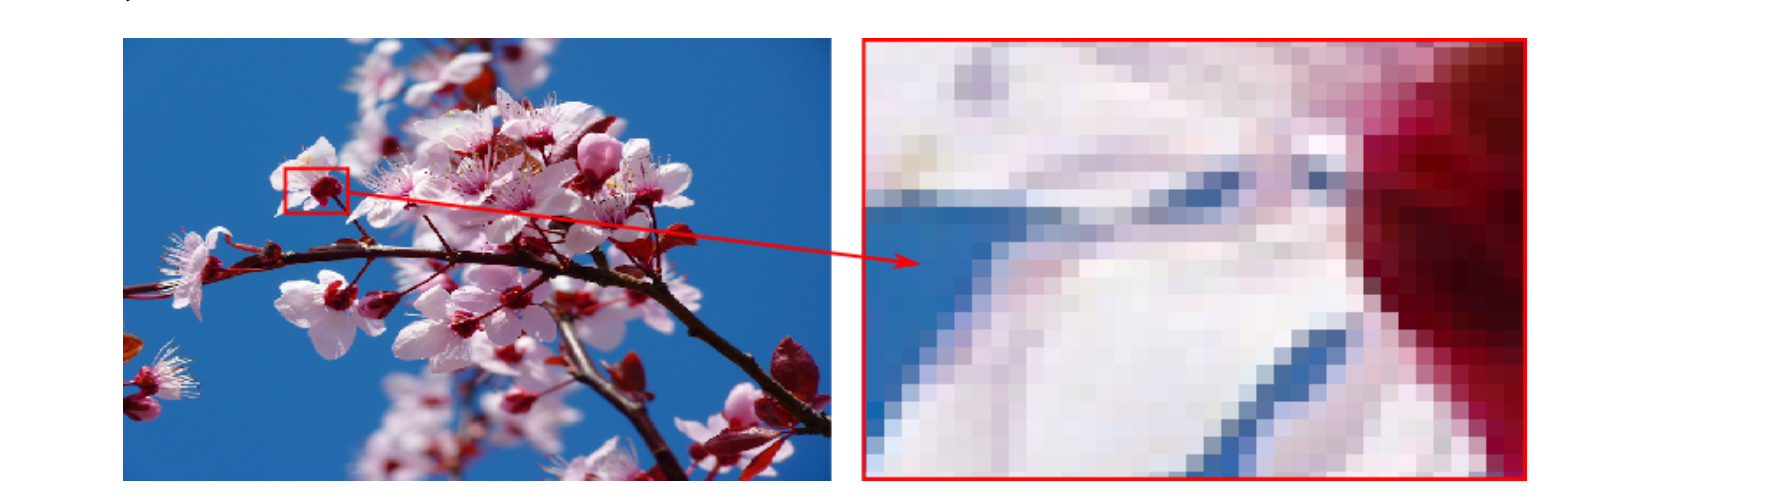 Zoomed in pixel image 